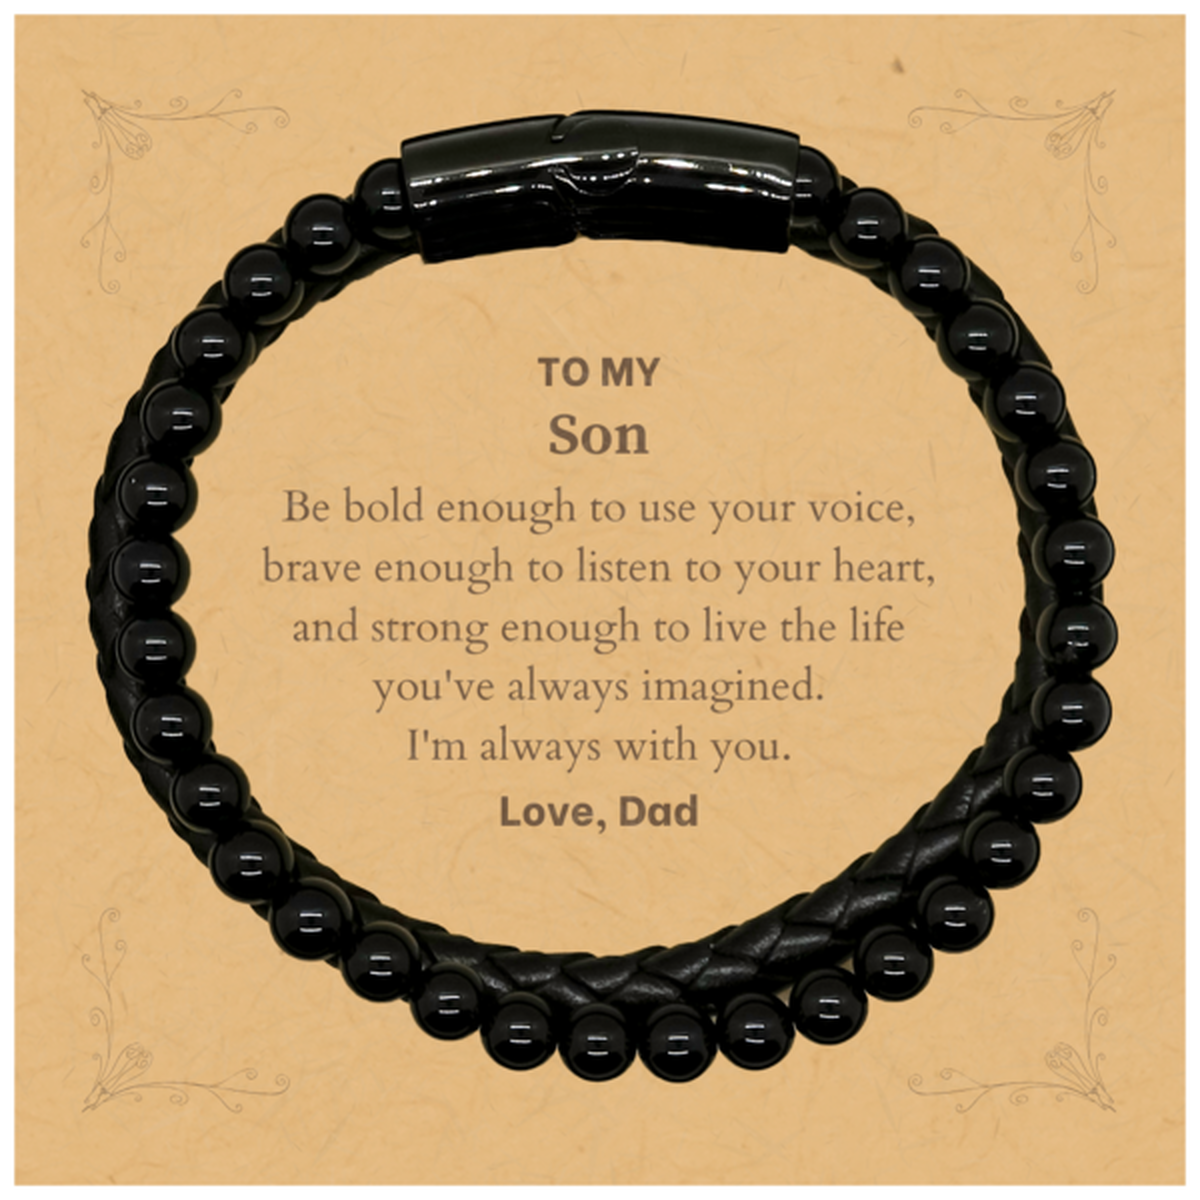 Keepsake Son Stone Leather Bracelets Gift Idea Graduation Christmas Birthday Son from Dad, Son Be bold enough to use your voice, brave enough to listen to your heart. Love, Dad